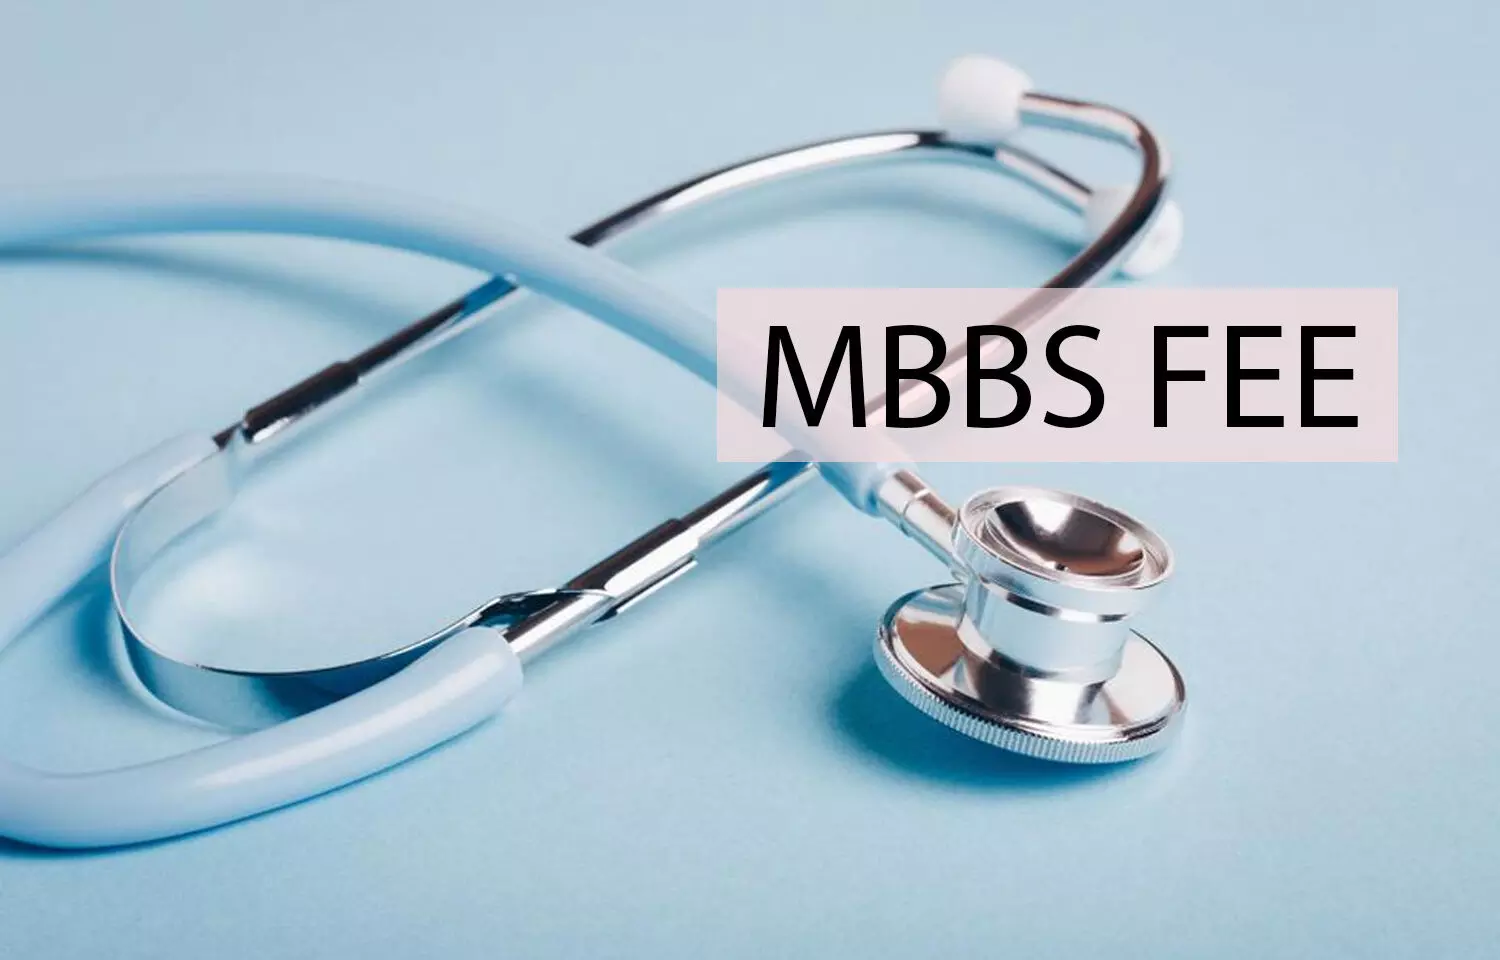 Applying for MBBS in Haryana: Check out fee structure for Govt Medical Colleges